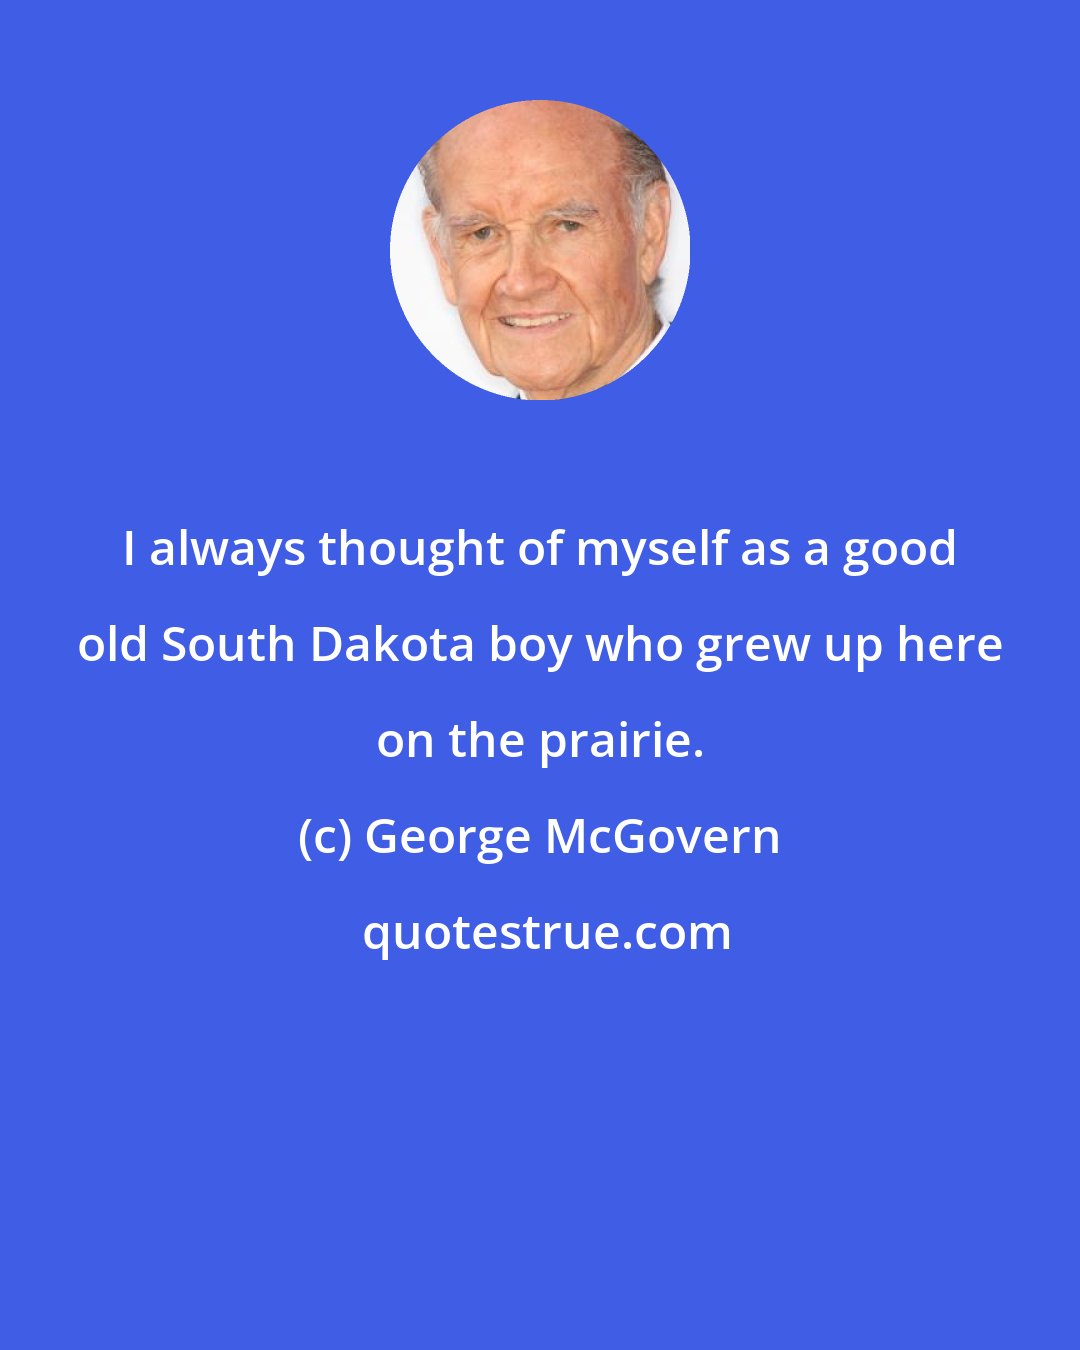 George McGovern: I always thought of myself as a good old South Dakota boy who grew up here on the prairie.